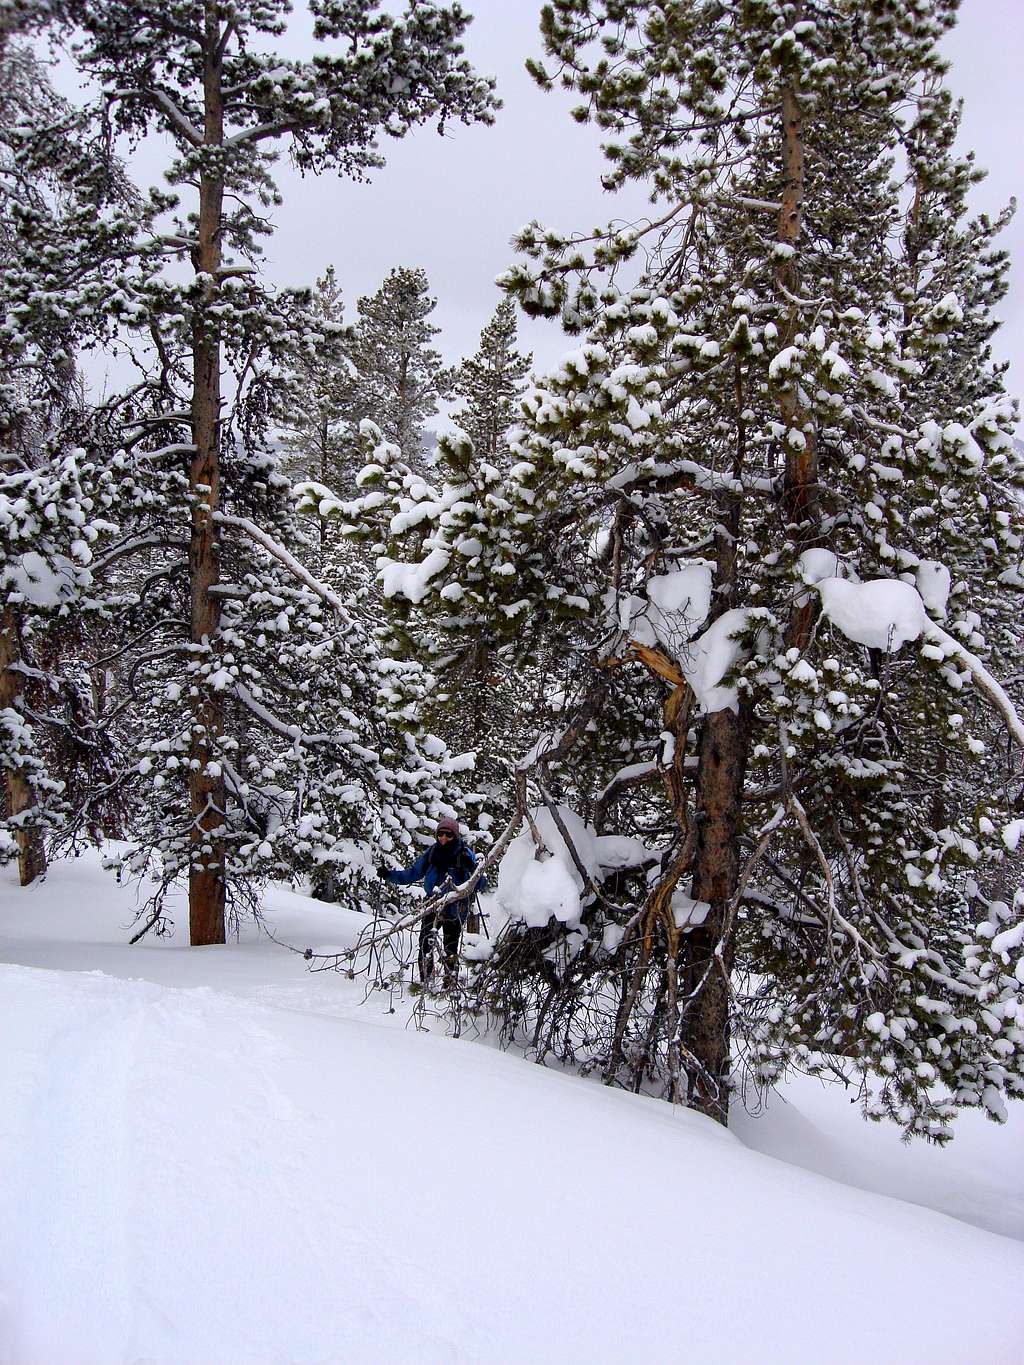 Open woods on the slopes above Broad Canyon